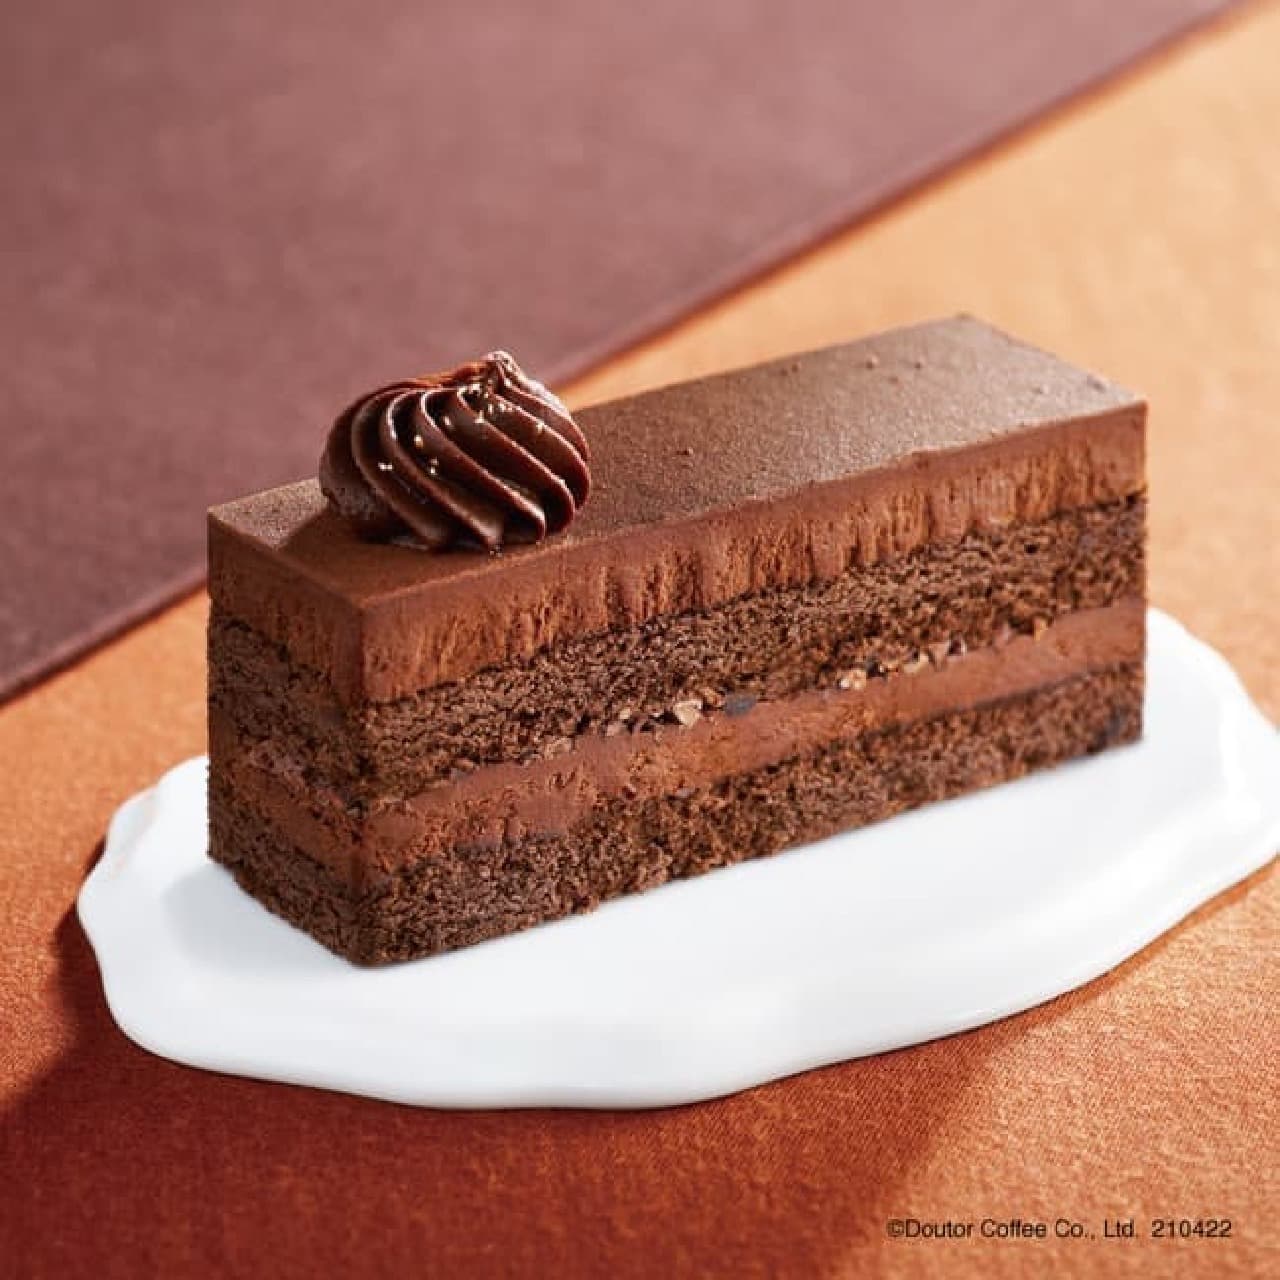 Excelsior Cafe "3 types of chocolate cake-using Belgian couverture chocolate-"